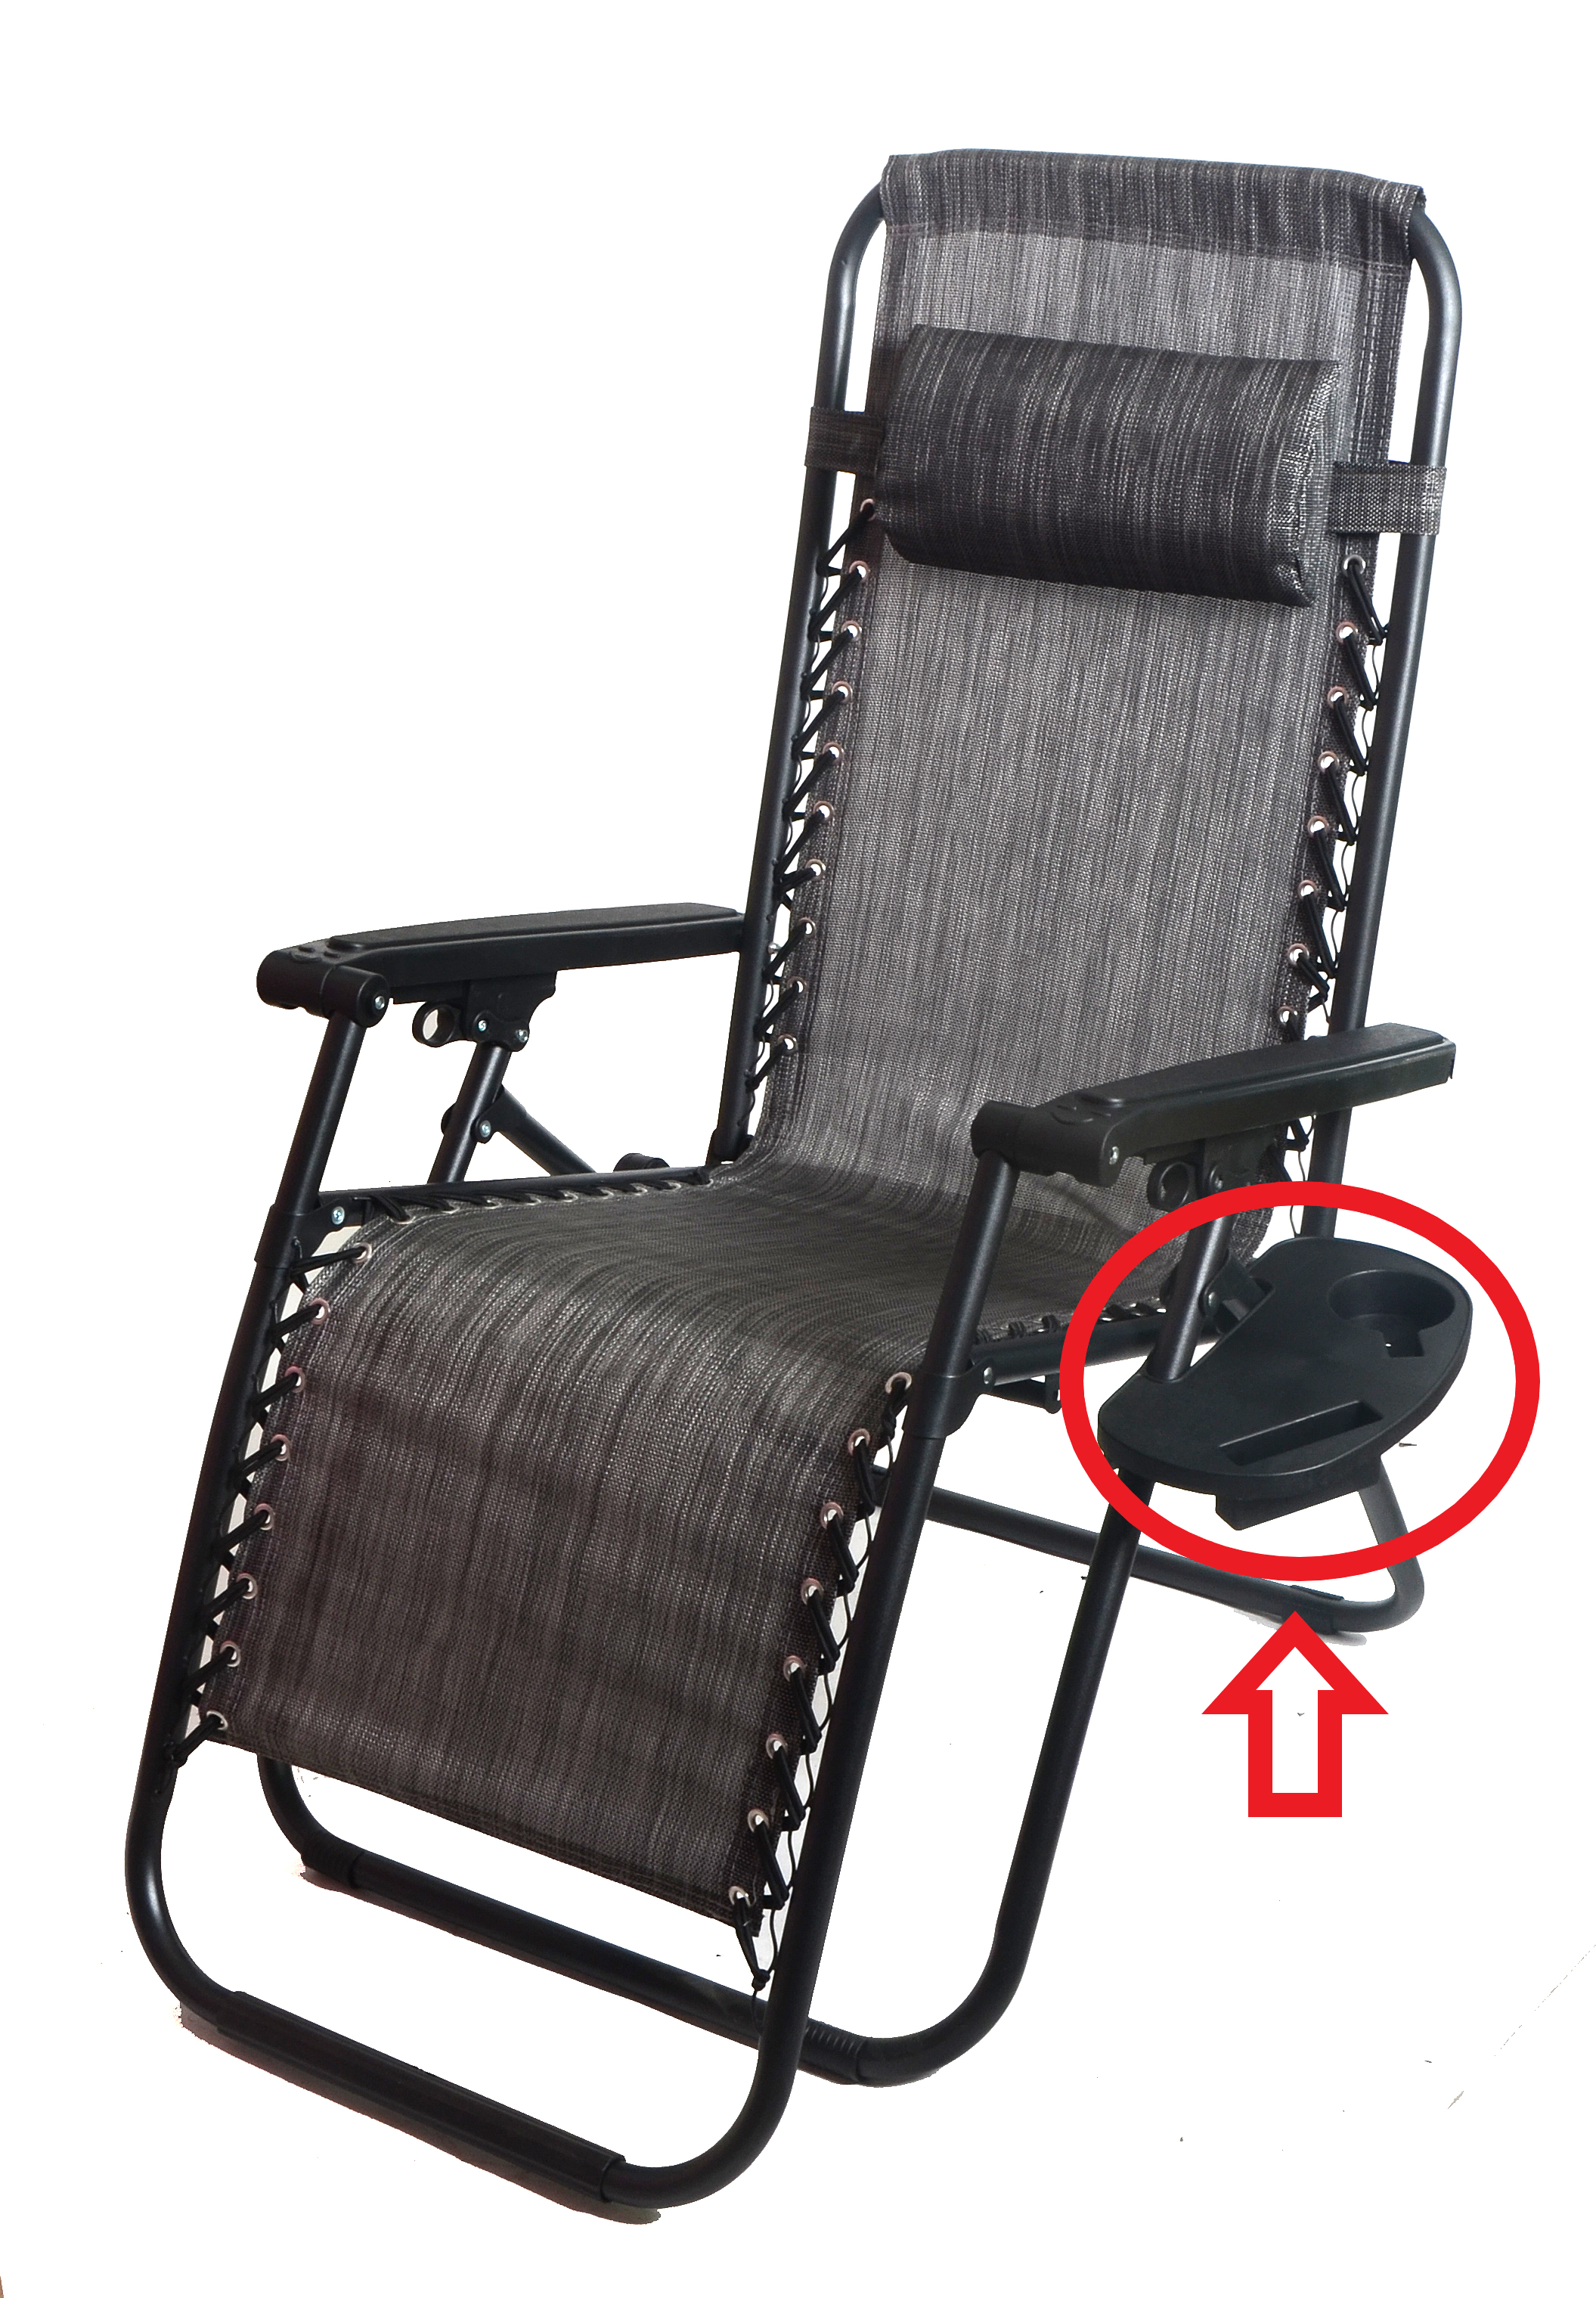 Replacement Parts for Anti-gravity Chair 909029, 909028, 909027